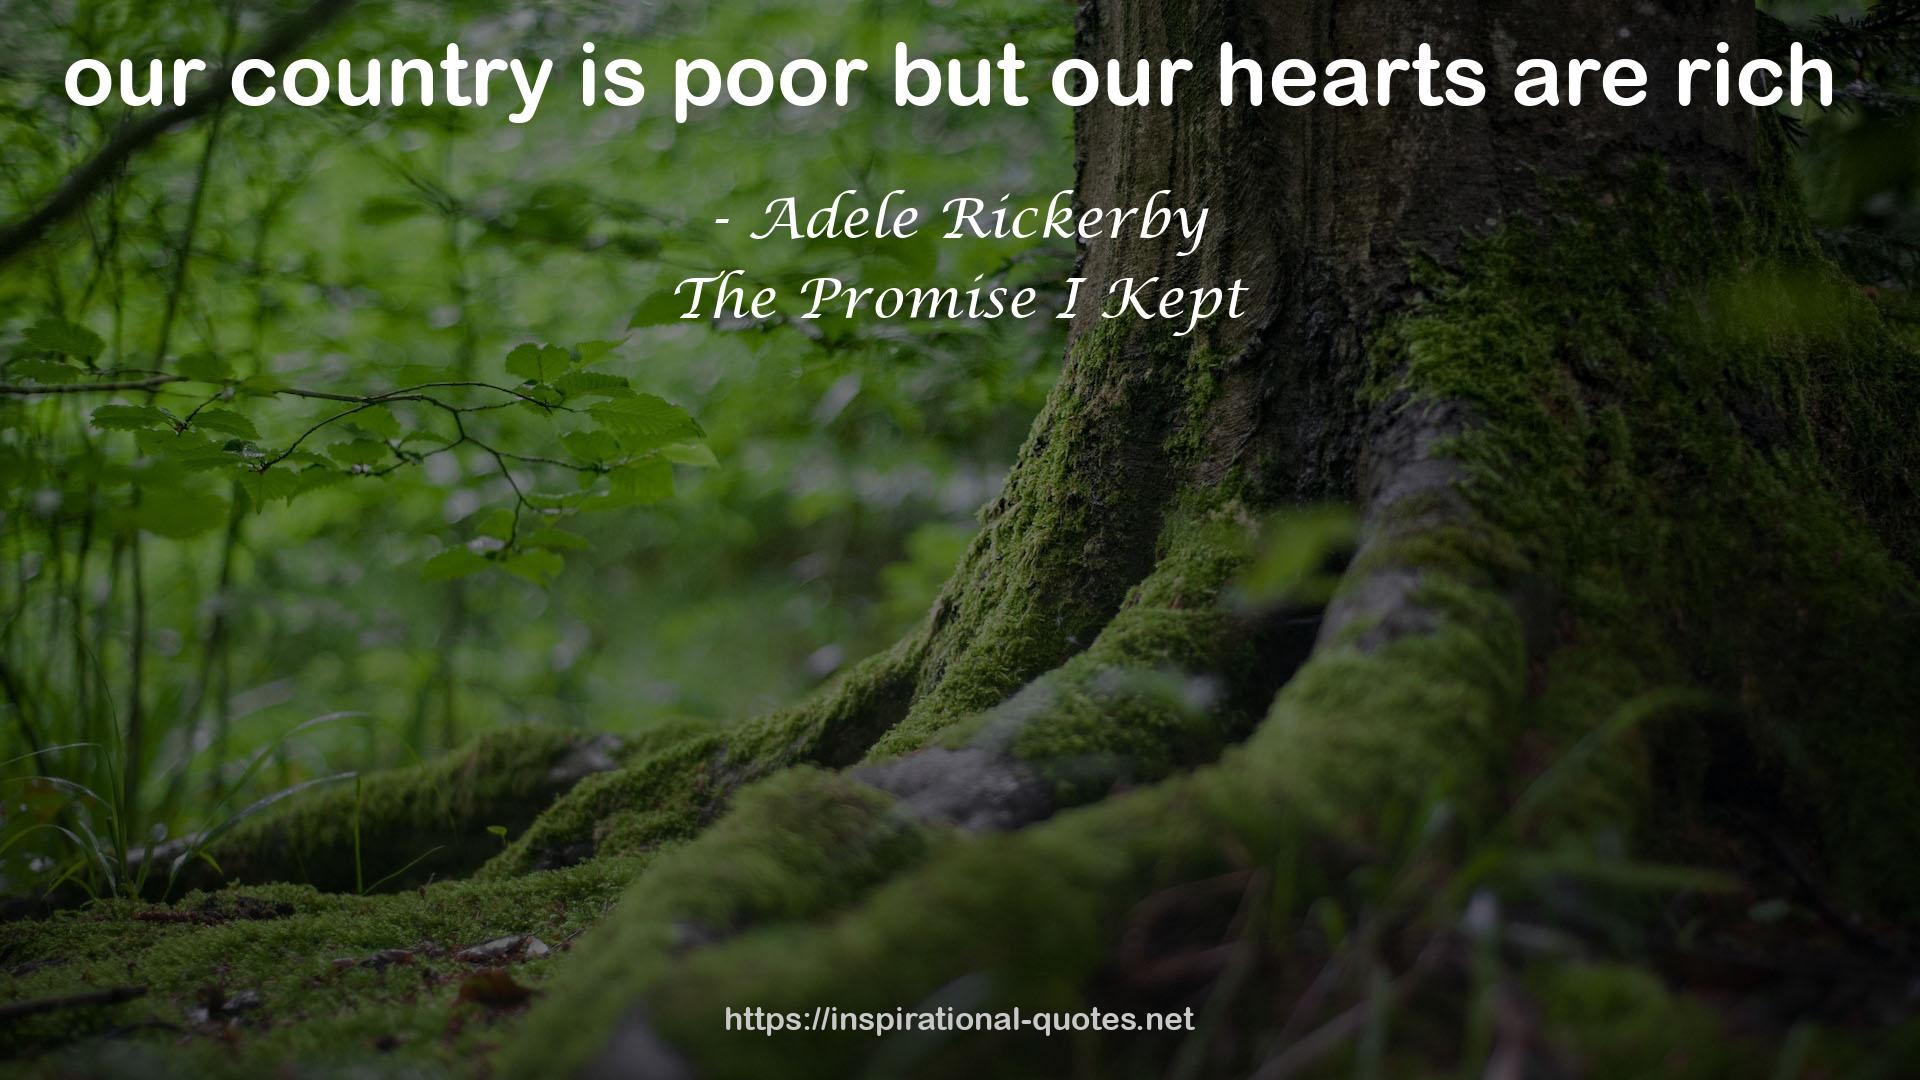 Adele Rickerby QUOTES